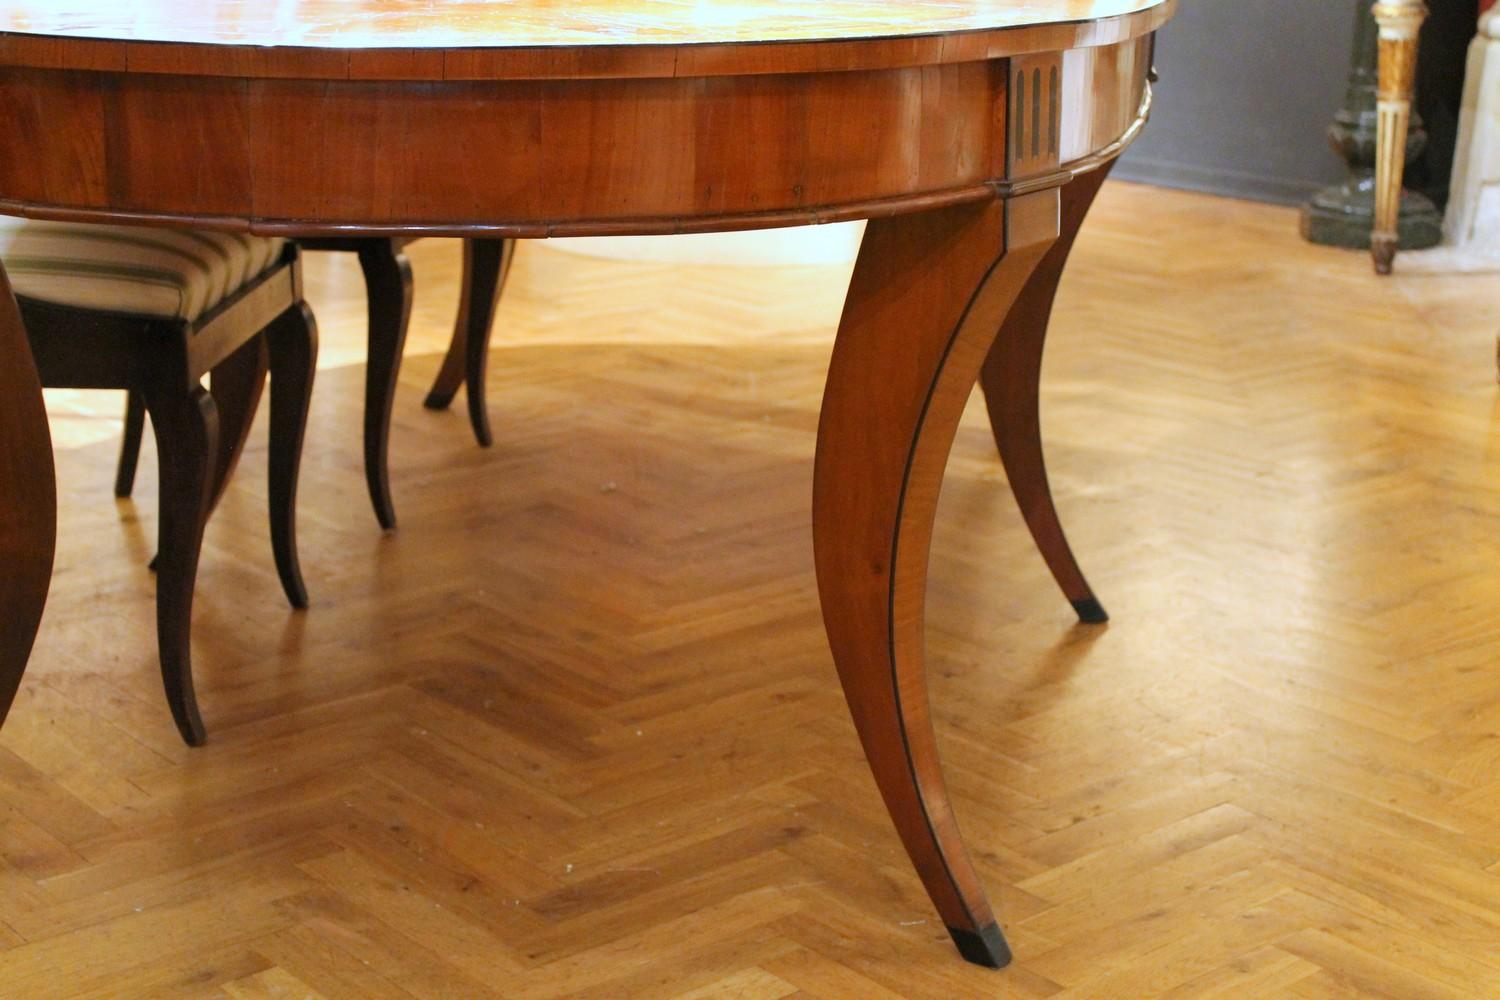 Italian Empire Style 19th Century Oval Cherrywood and Ebony Dining Room Table For Sale 3